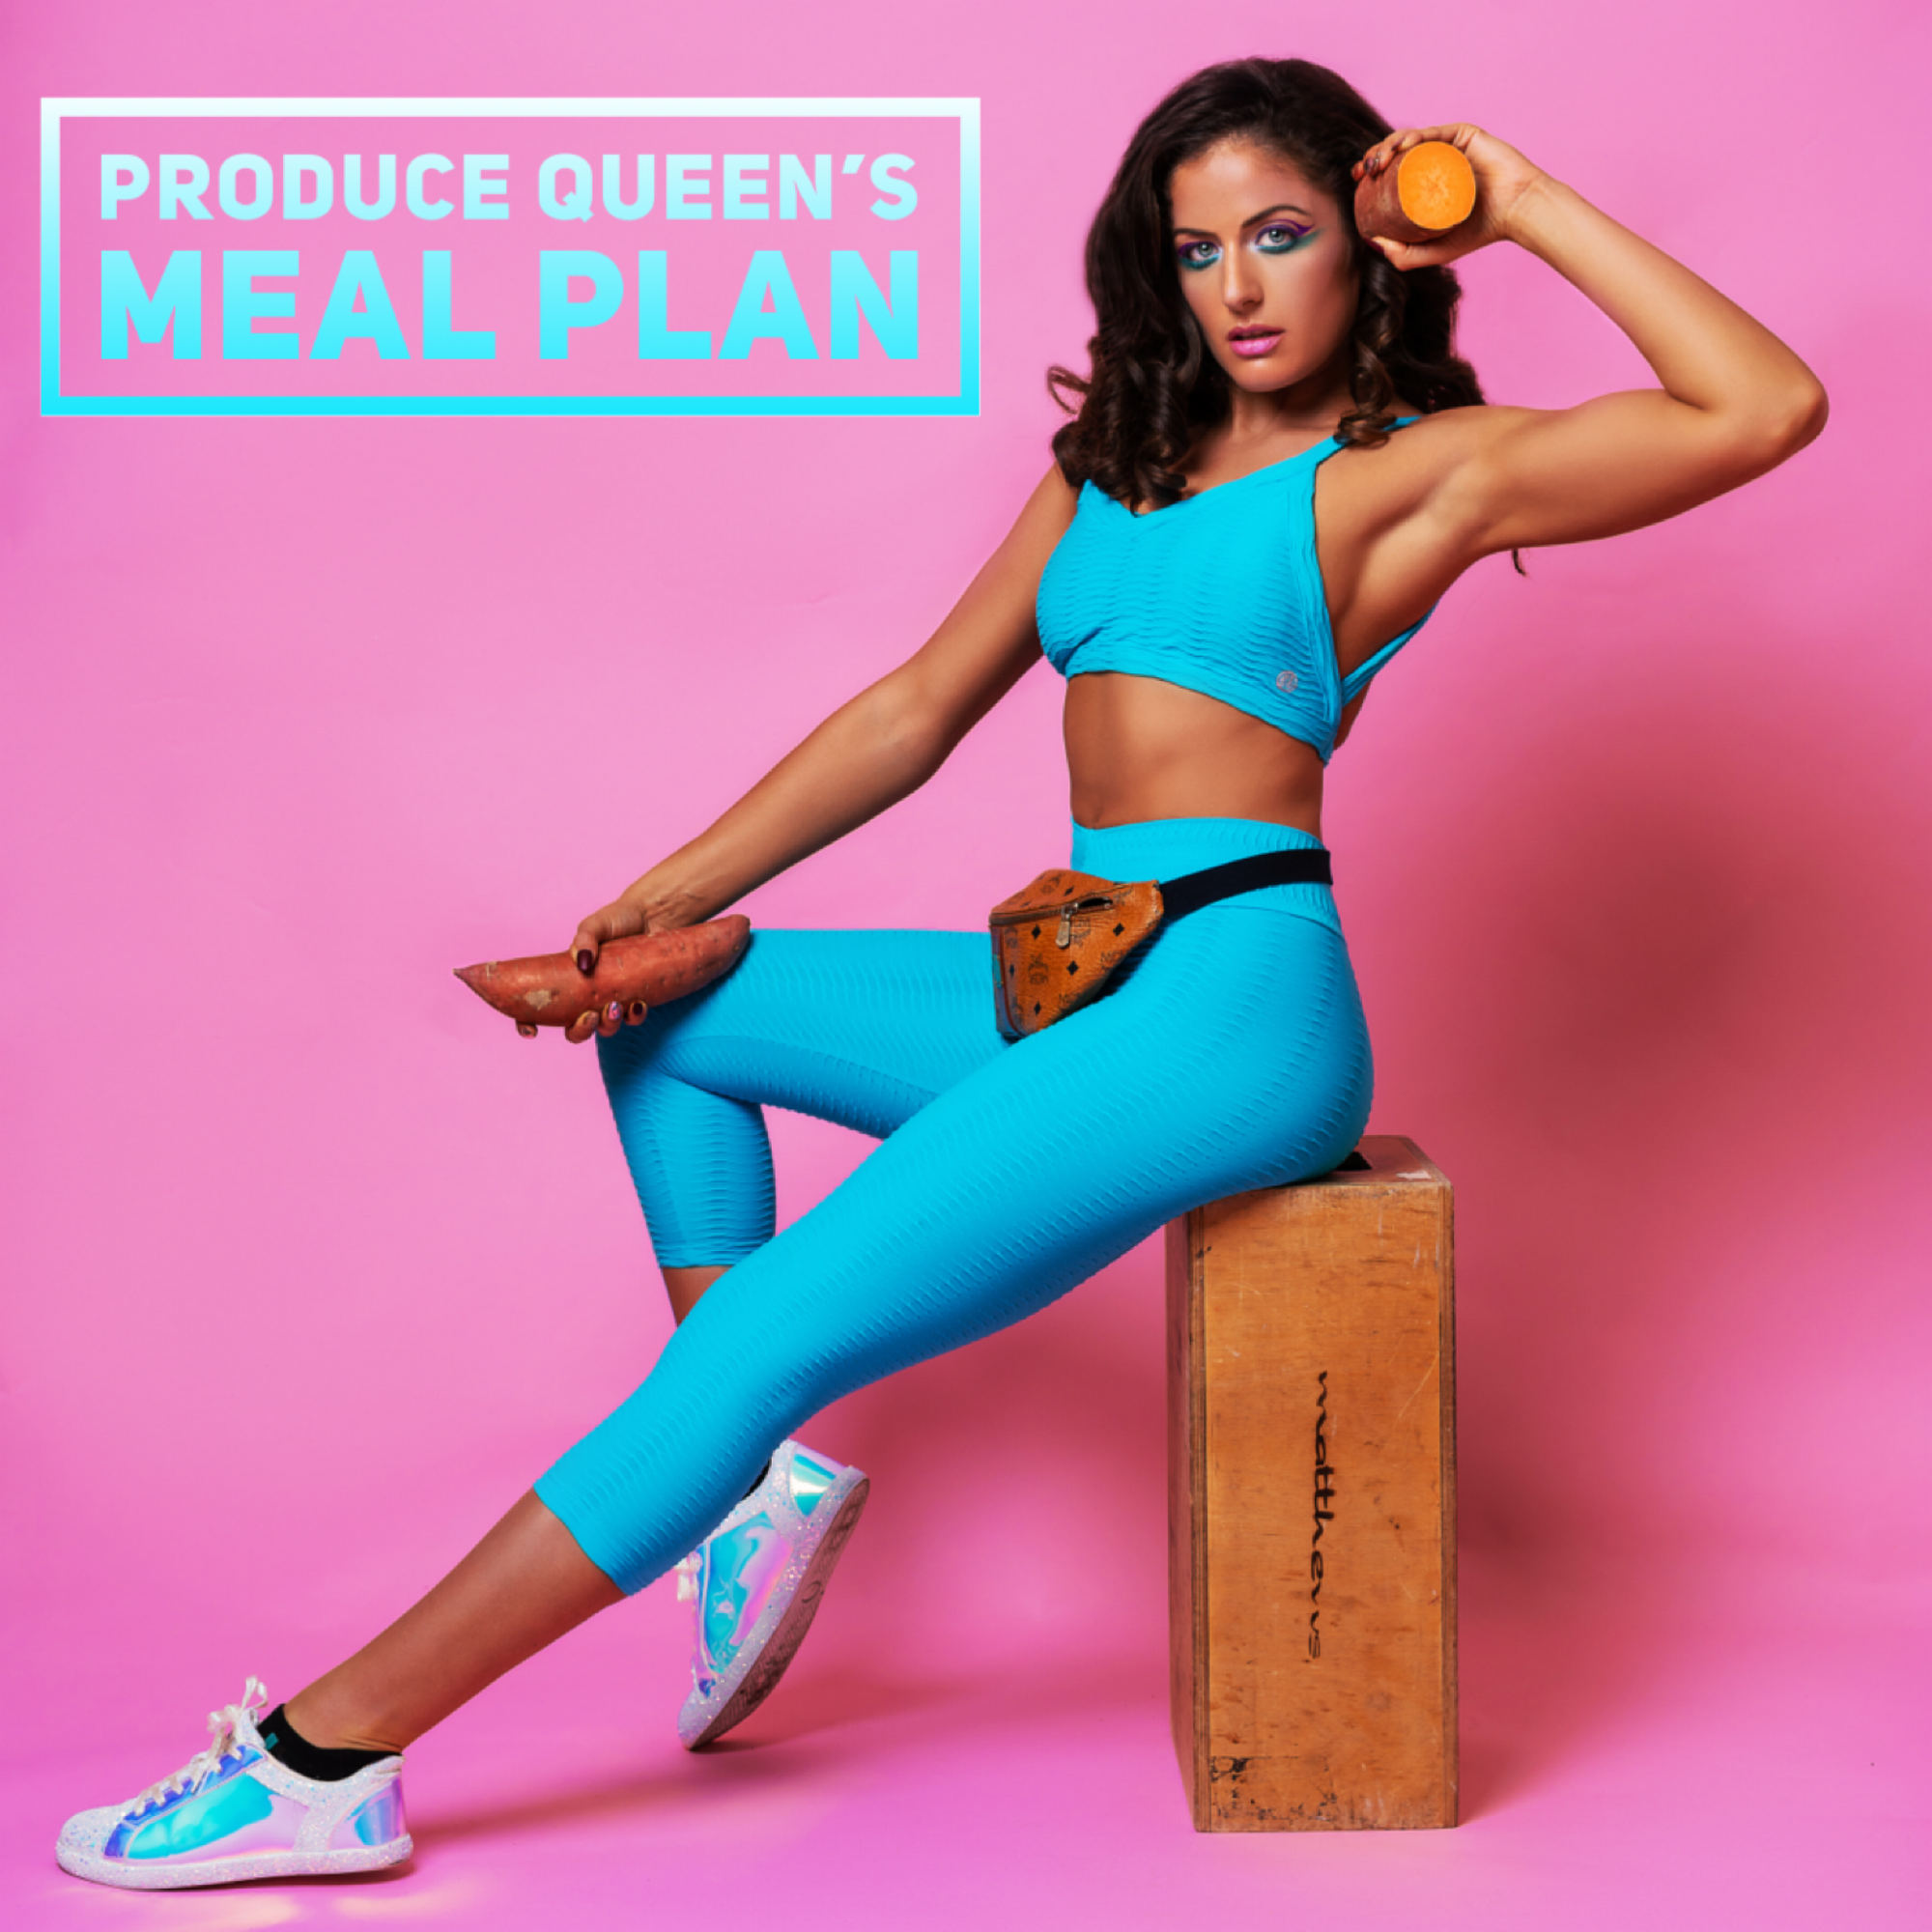 Produce Queen's Meal and Fitness Plan